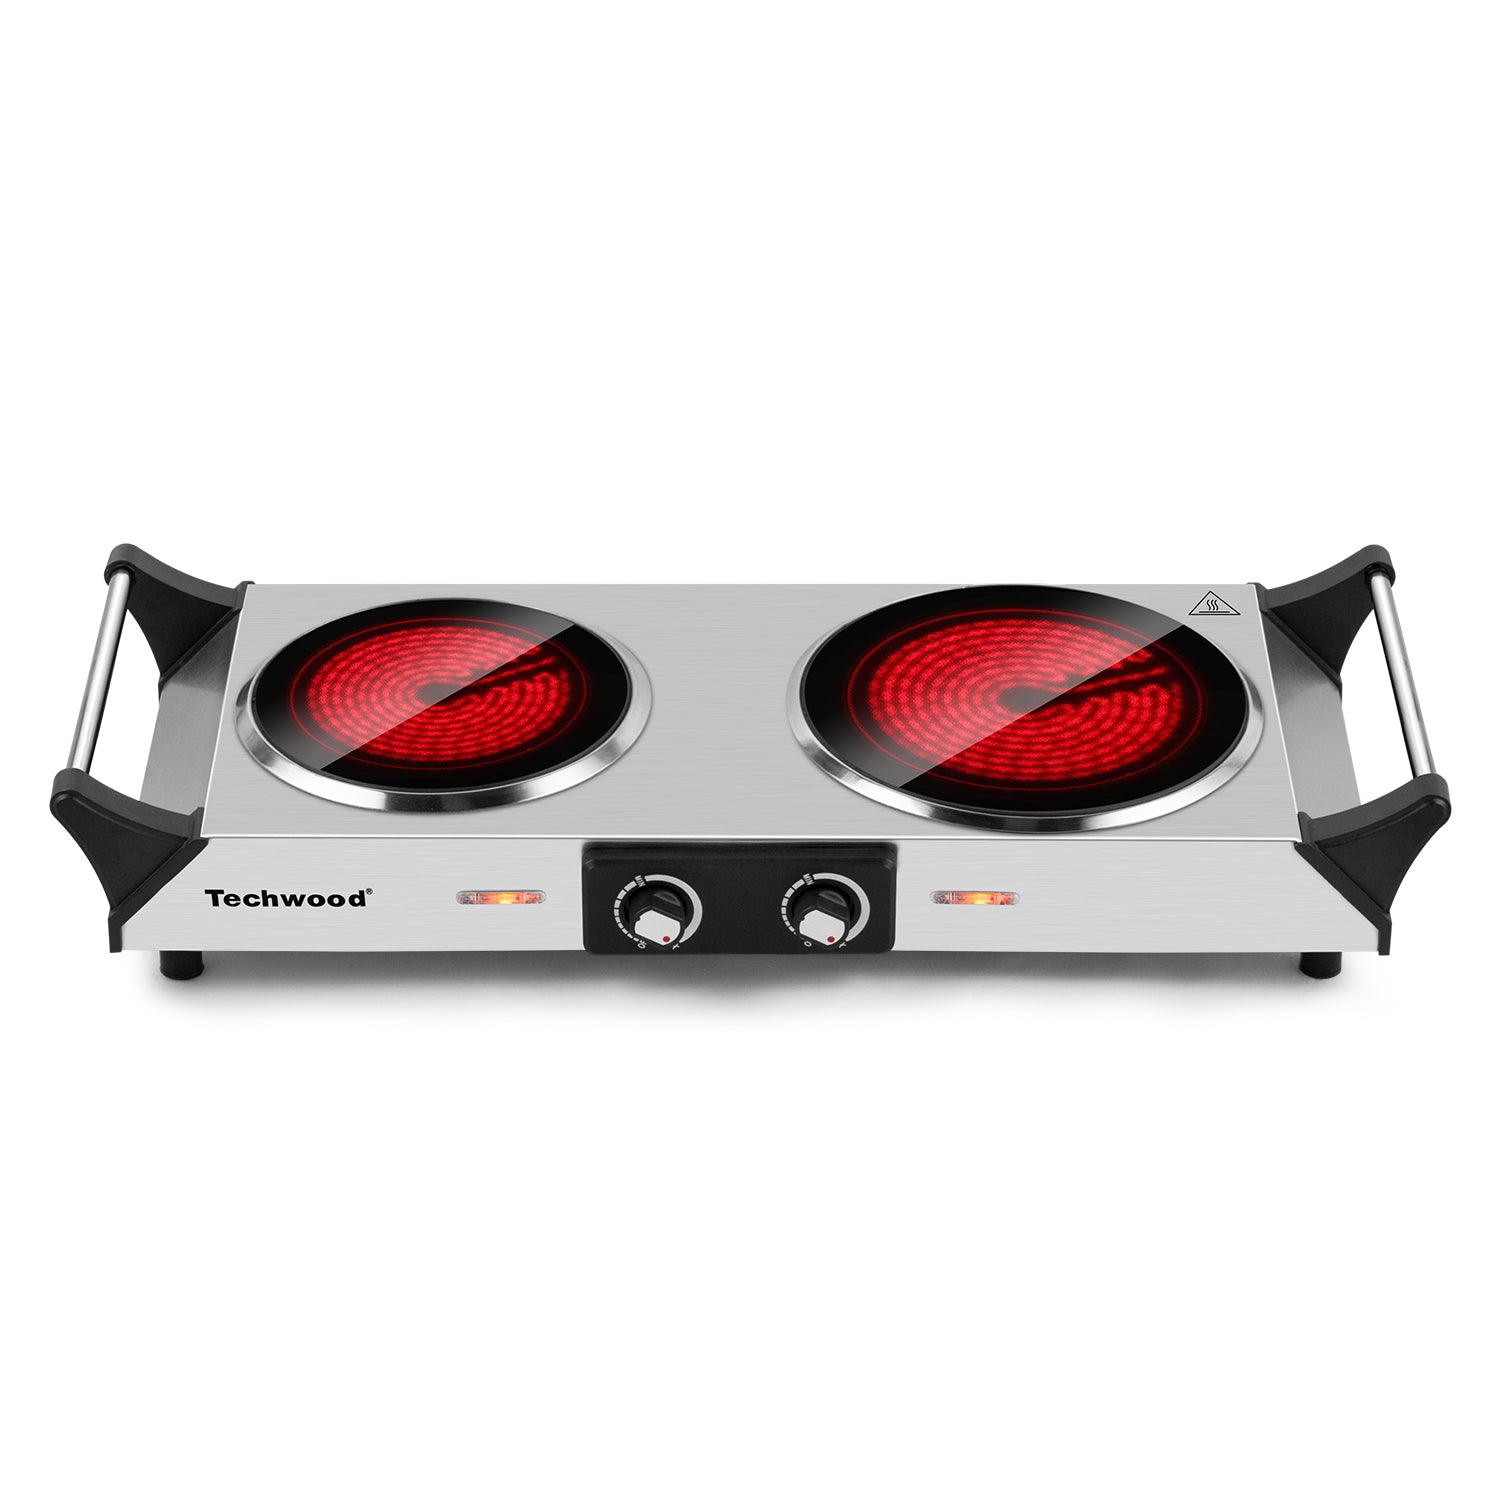 Hot Plate, Techwood 1800W Dual Electric Stoves, Countertop Stove Double  Burner for Cooking, Infrared Ceramic Hot Plates Double Cooktop, Silver